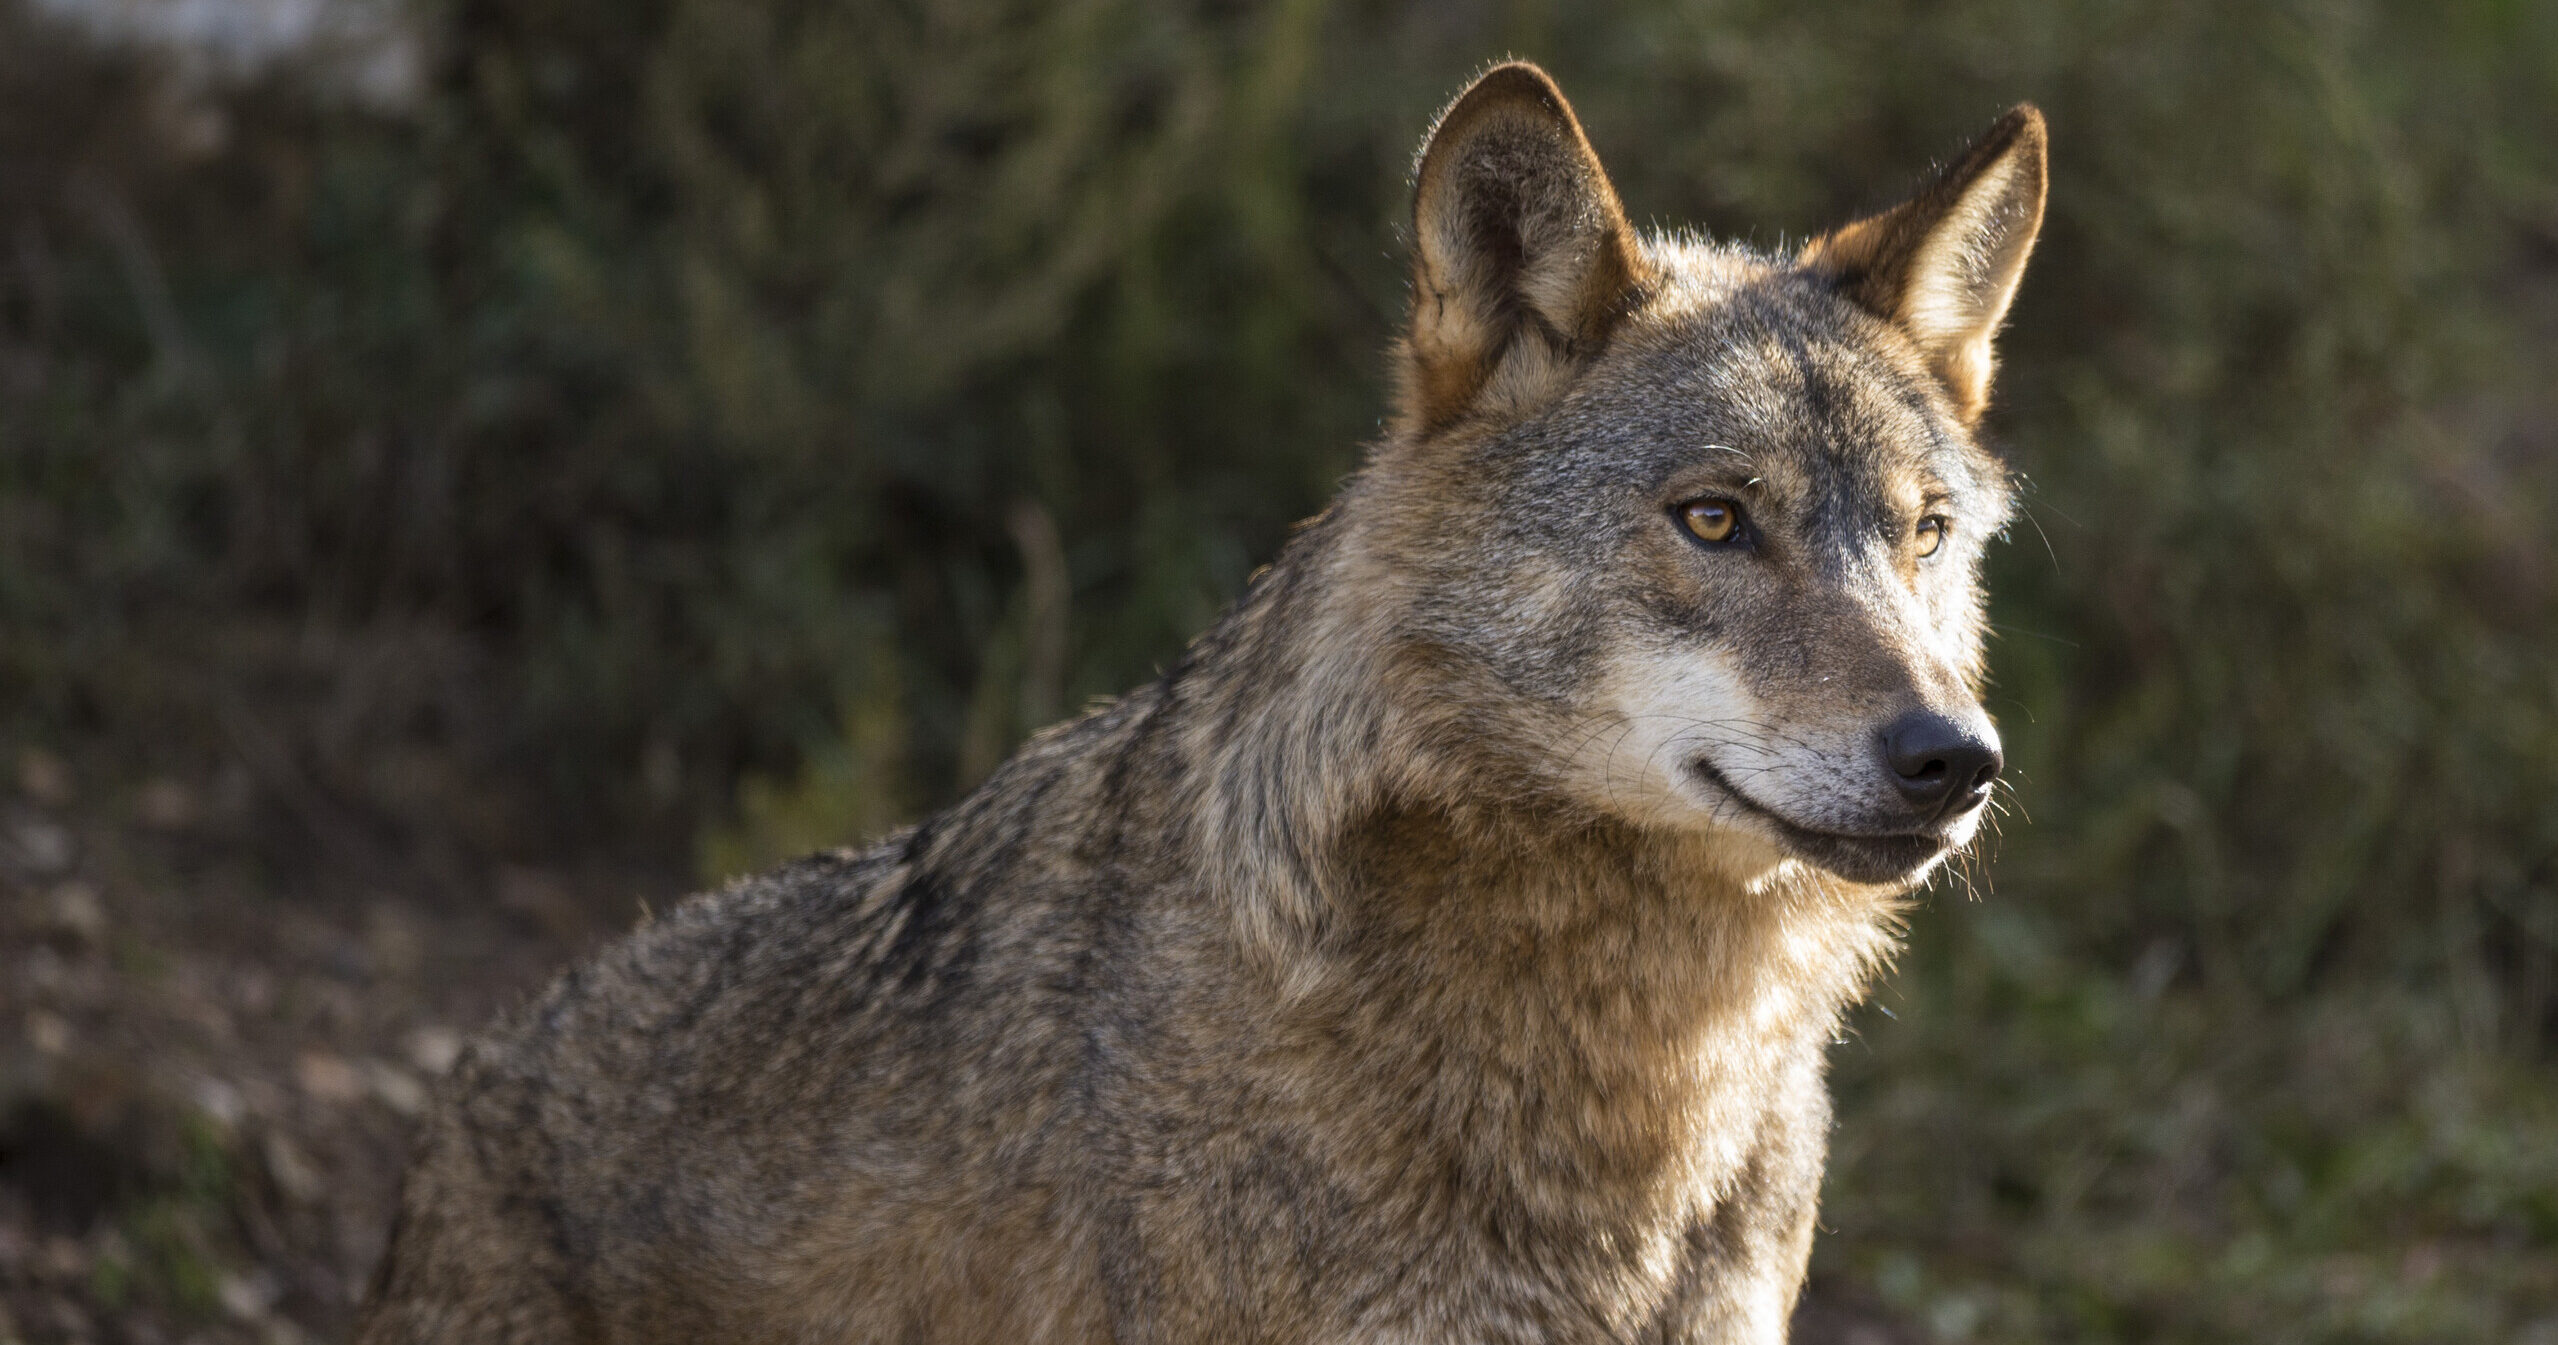 The Return of the Wolf in Europe | Working Towards Coexistence